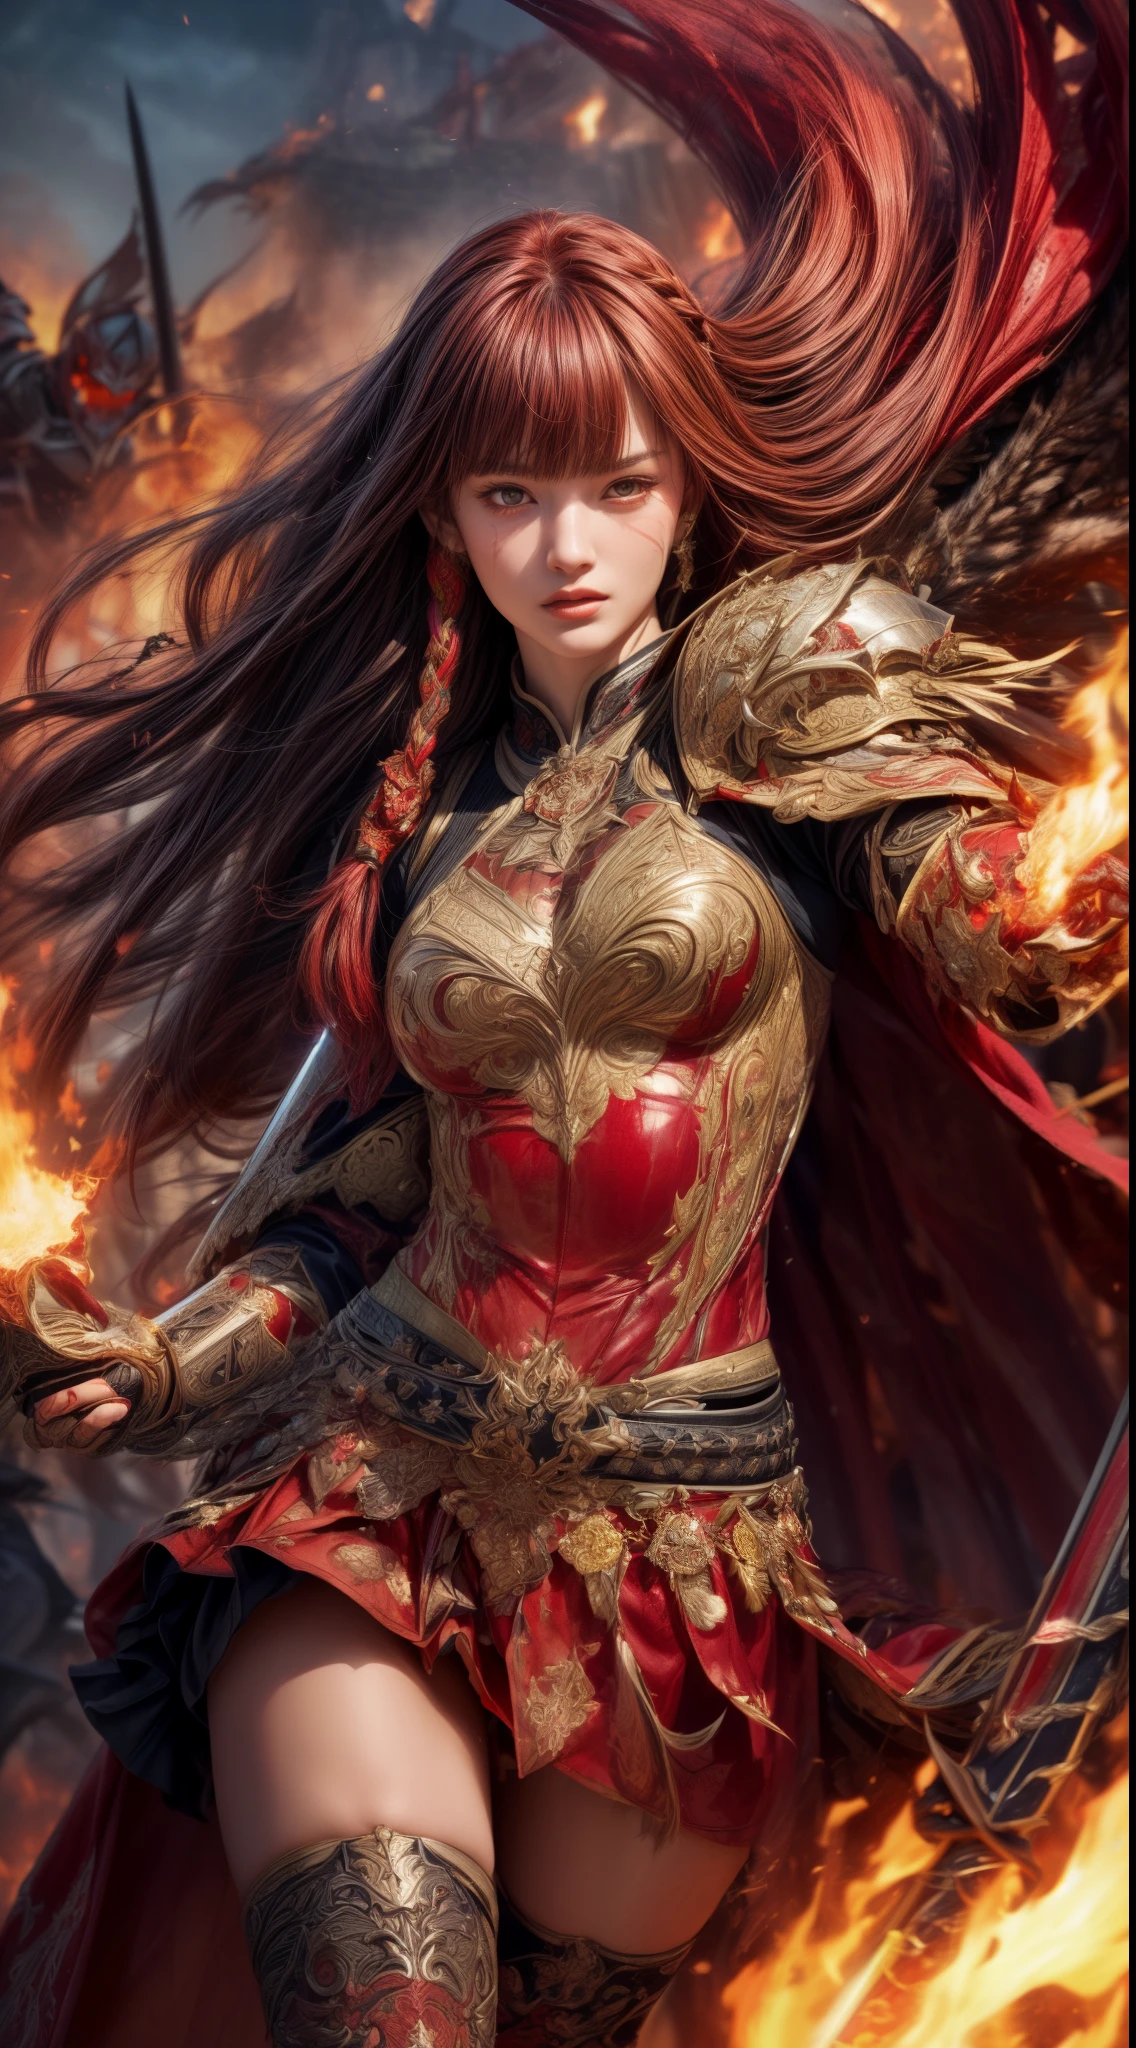 Very beautiful woman、Slender women、(Detailed face)、Realistic Skin、((Knight of Fire)), (((Red Armor:1.25)))、((((Black armor with very fine and intricate decoration))))、((Delicate photo))，(Girl Astepeace RAW Photo Details:1.25), (highest quality:1.6), (超A high resolution:1.5), (Realistic:1.75), 8K resolution, Canon EOS R5, 50mm, Absurd, Ultra-detailed,Cinema Lighting,Battlefields of Medieval Europe、((battle))、RPG World、Final Fantasy、(((Embellished skirt)))、Thigh-high socks、Shin Guards、night、((too long bangs))、((One long thick dark red hair braid))、Get six-pack、Torn Cloak、Beautiful Armor、(((Giant Sword)))、In combat、The wind is blowing、(((Inferno filling the entire area)))、(((Leading a large group of red knights)))、(((Knight Commander)))、Armor with a Phoenix motif、Old scar on right cheek:1.2、((Fire blaze))